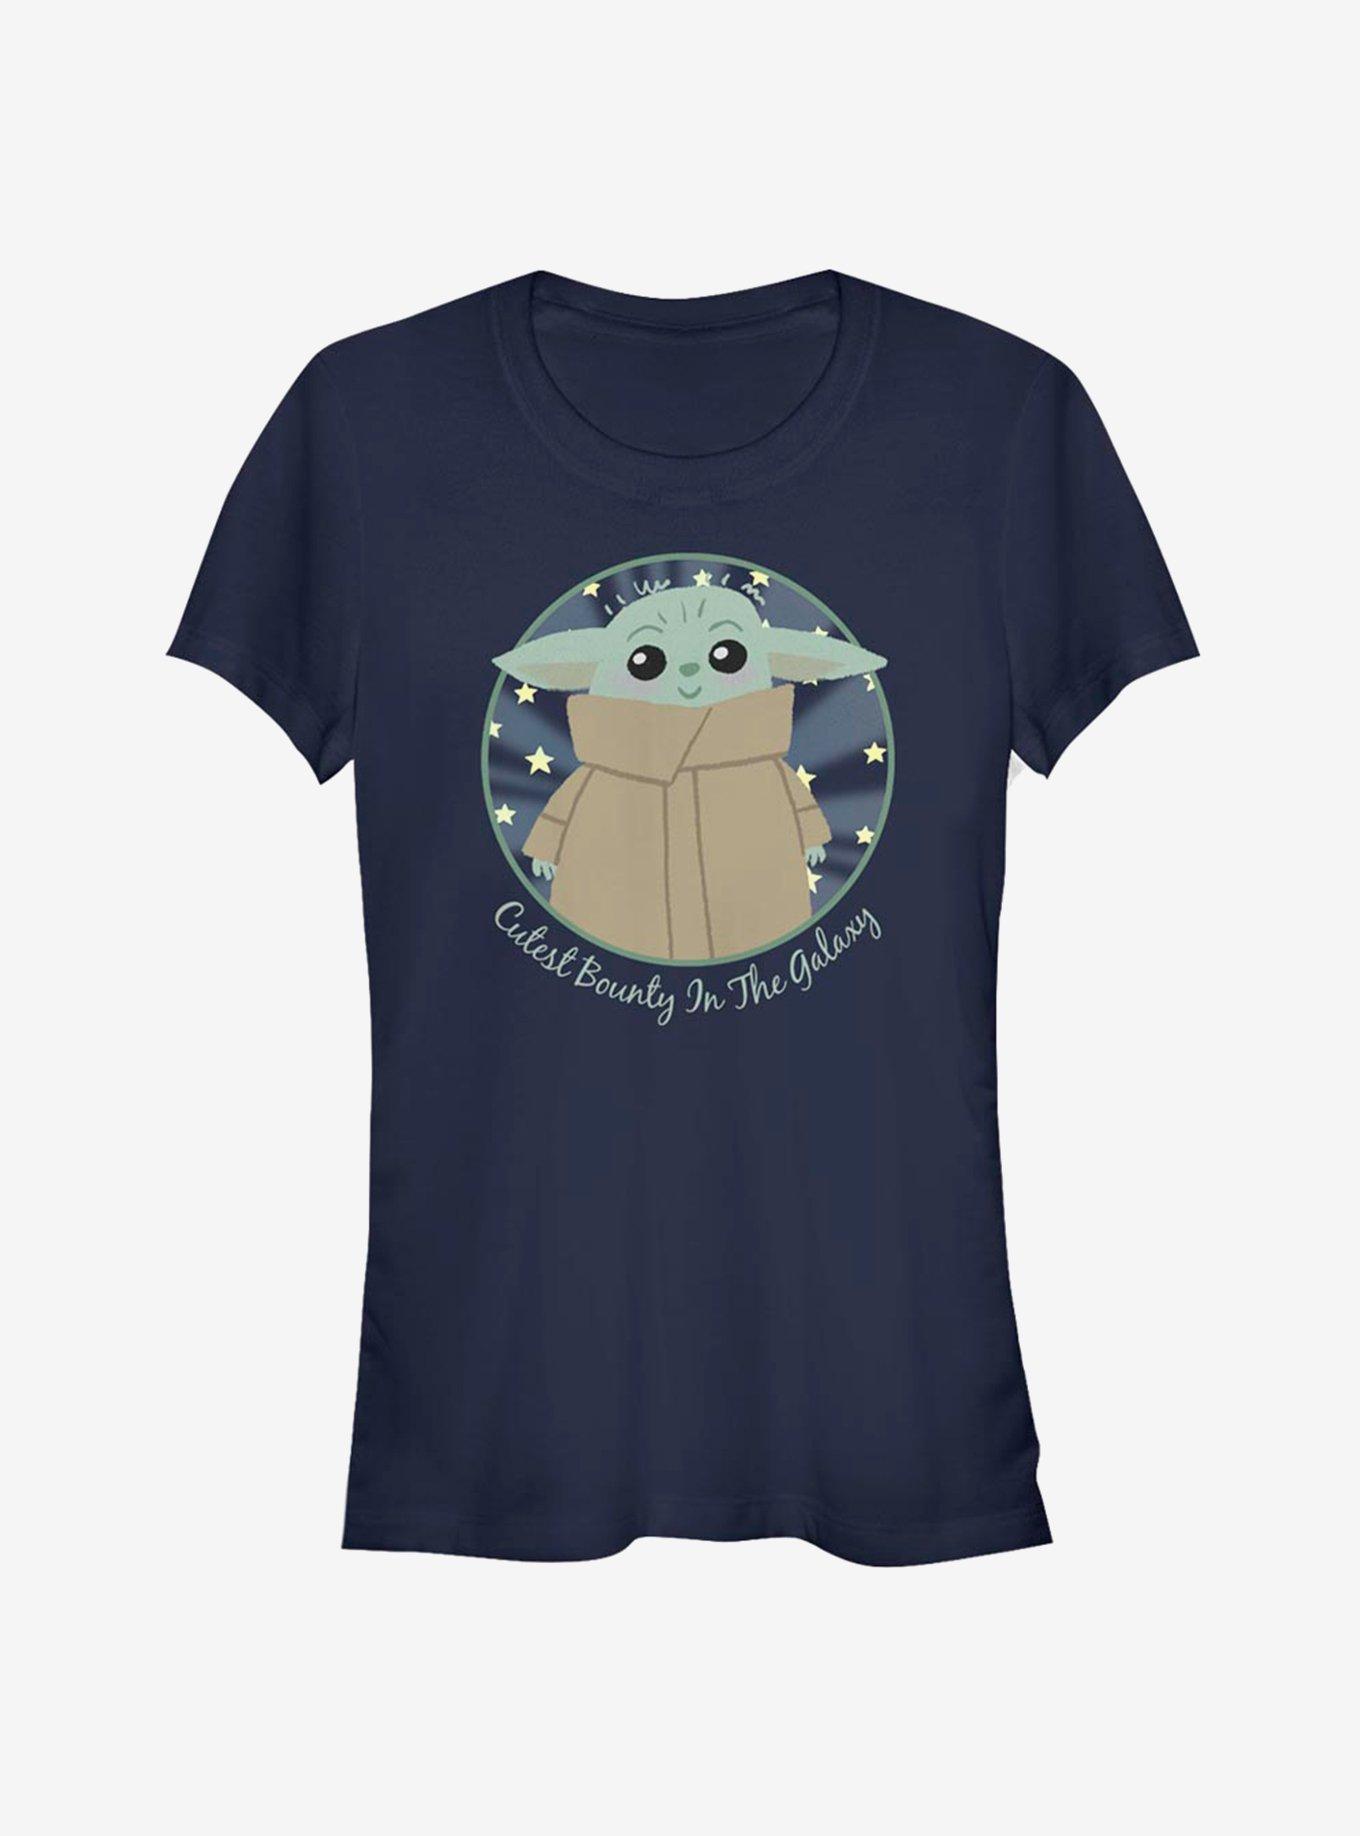 Star Wars The Mandalorian The Child Cutest Bounty In The Galaxy Girls T-Shirt, NAVY, hi-res